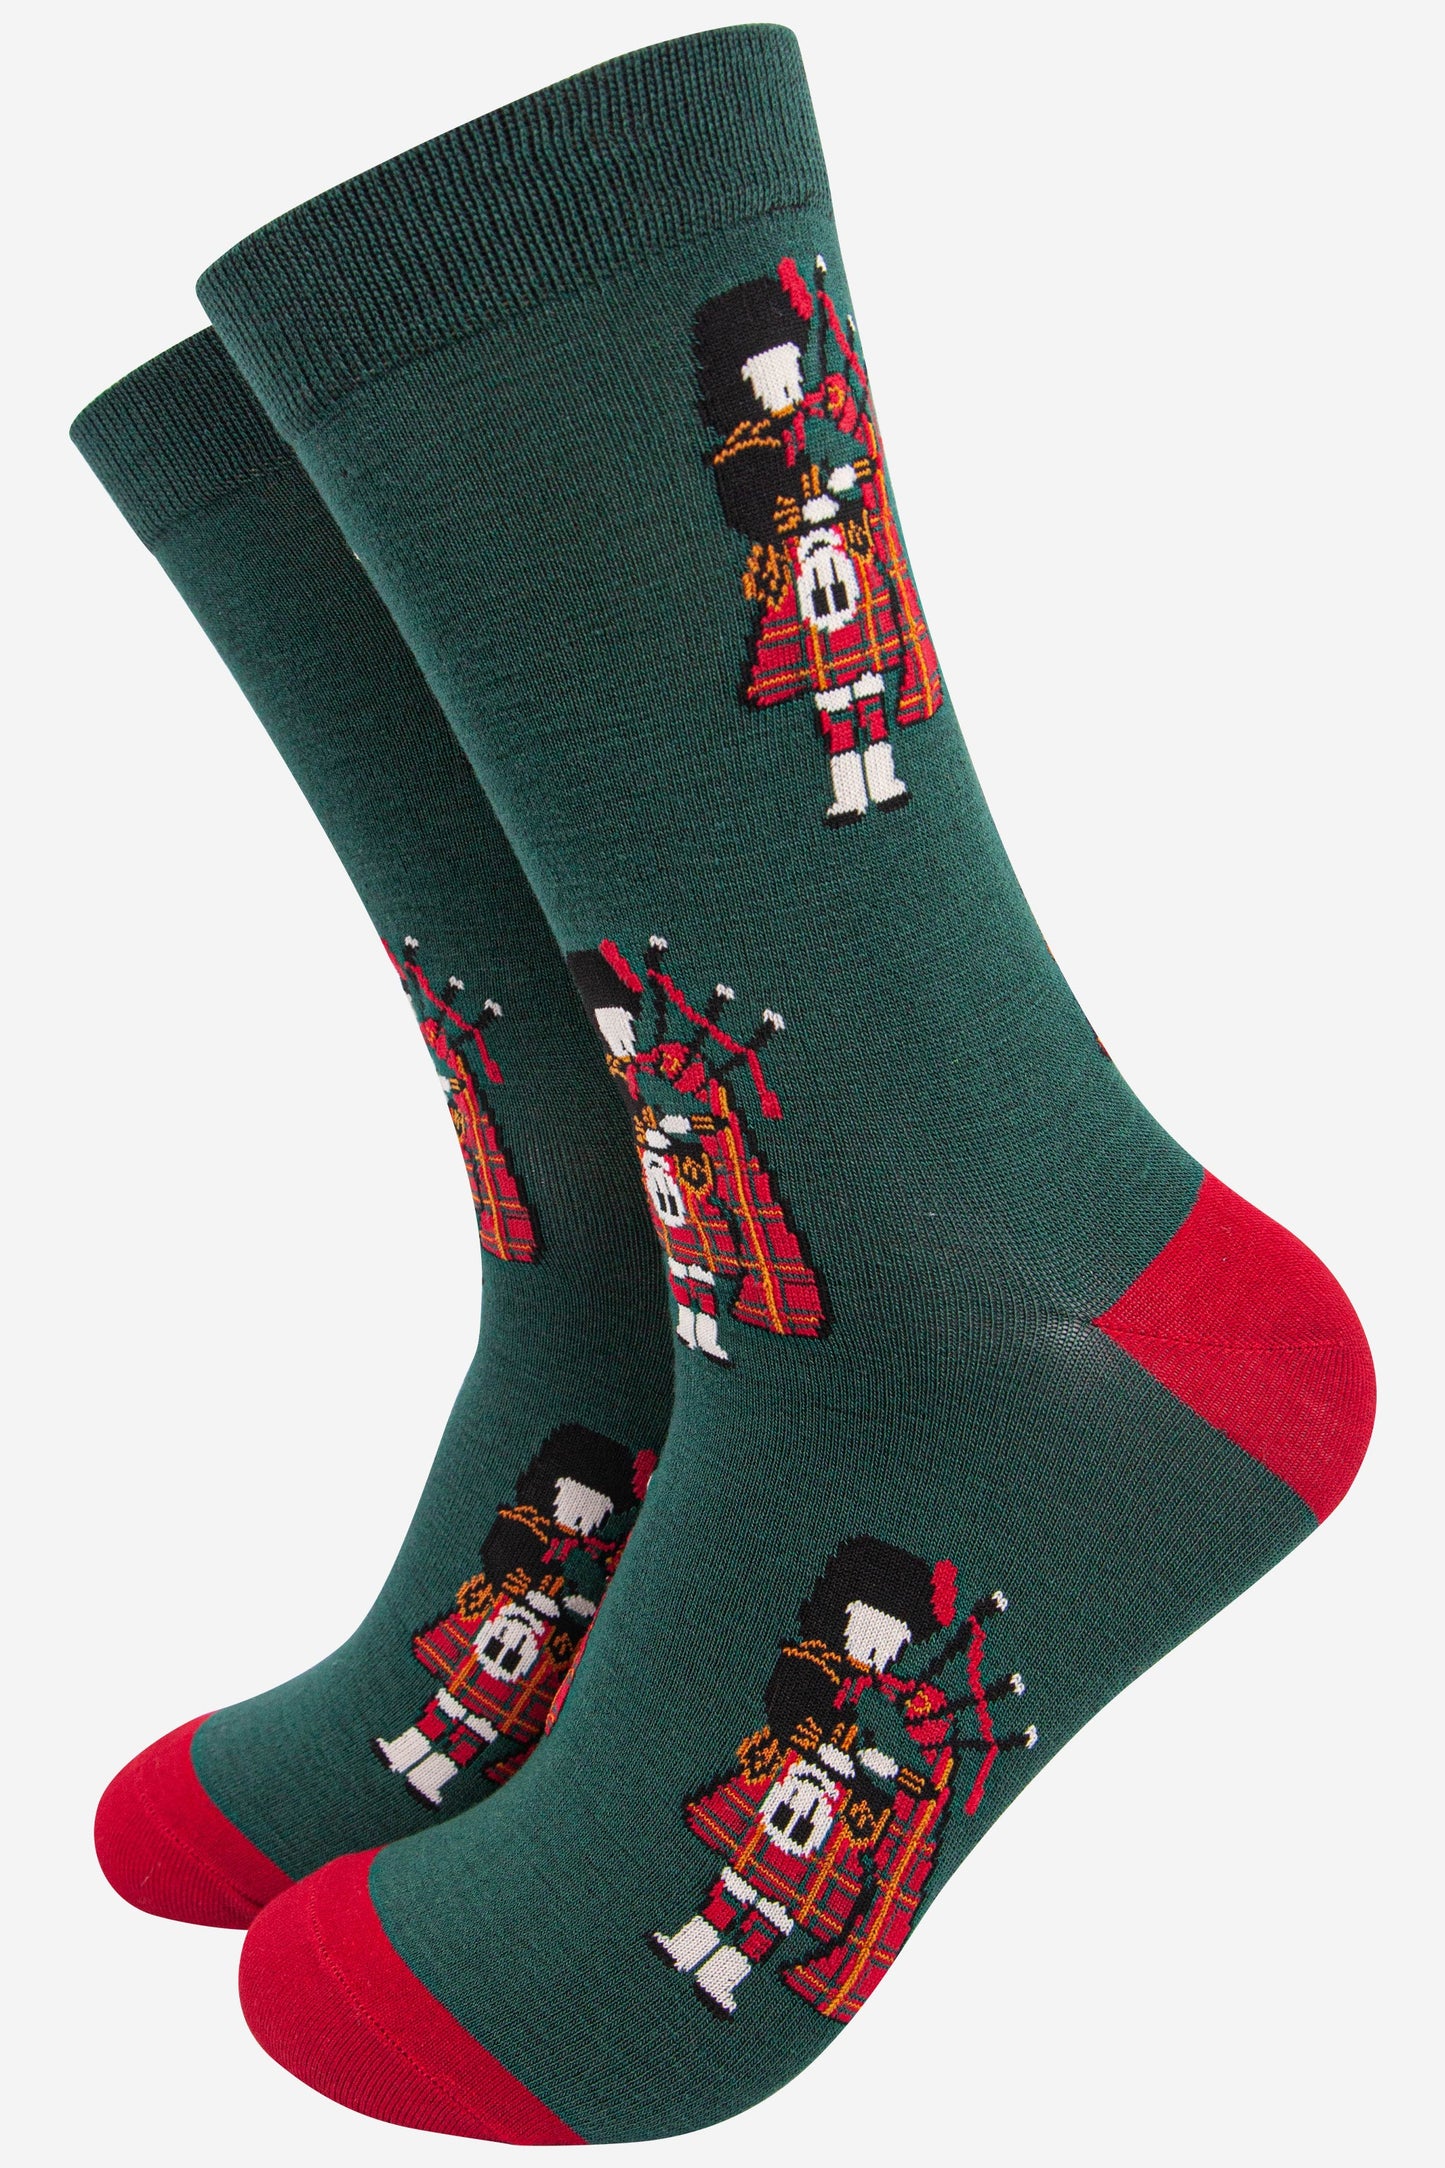 mens green bamboo socks featuring a scottish bagpipe player wearing a traditional red kilt